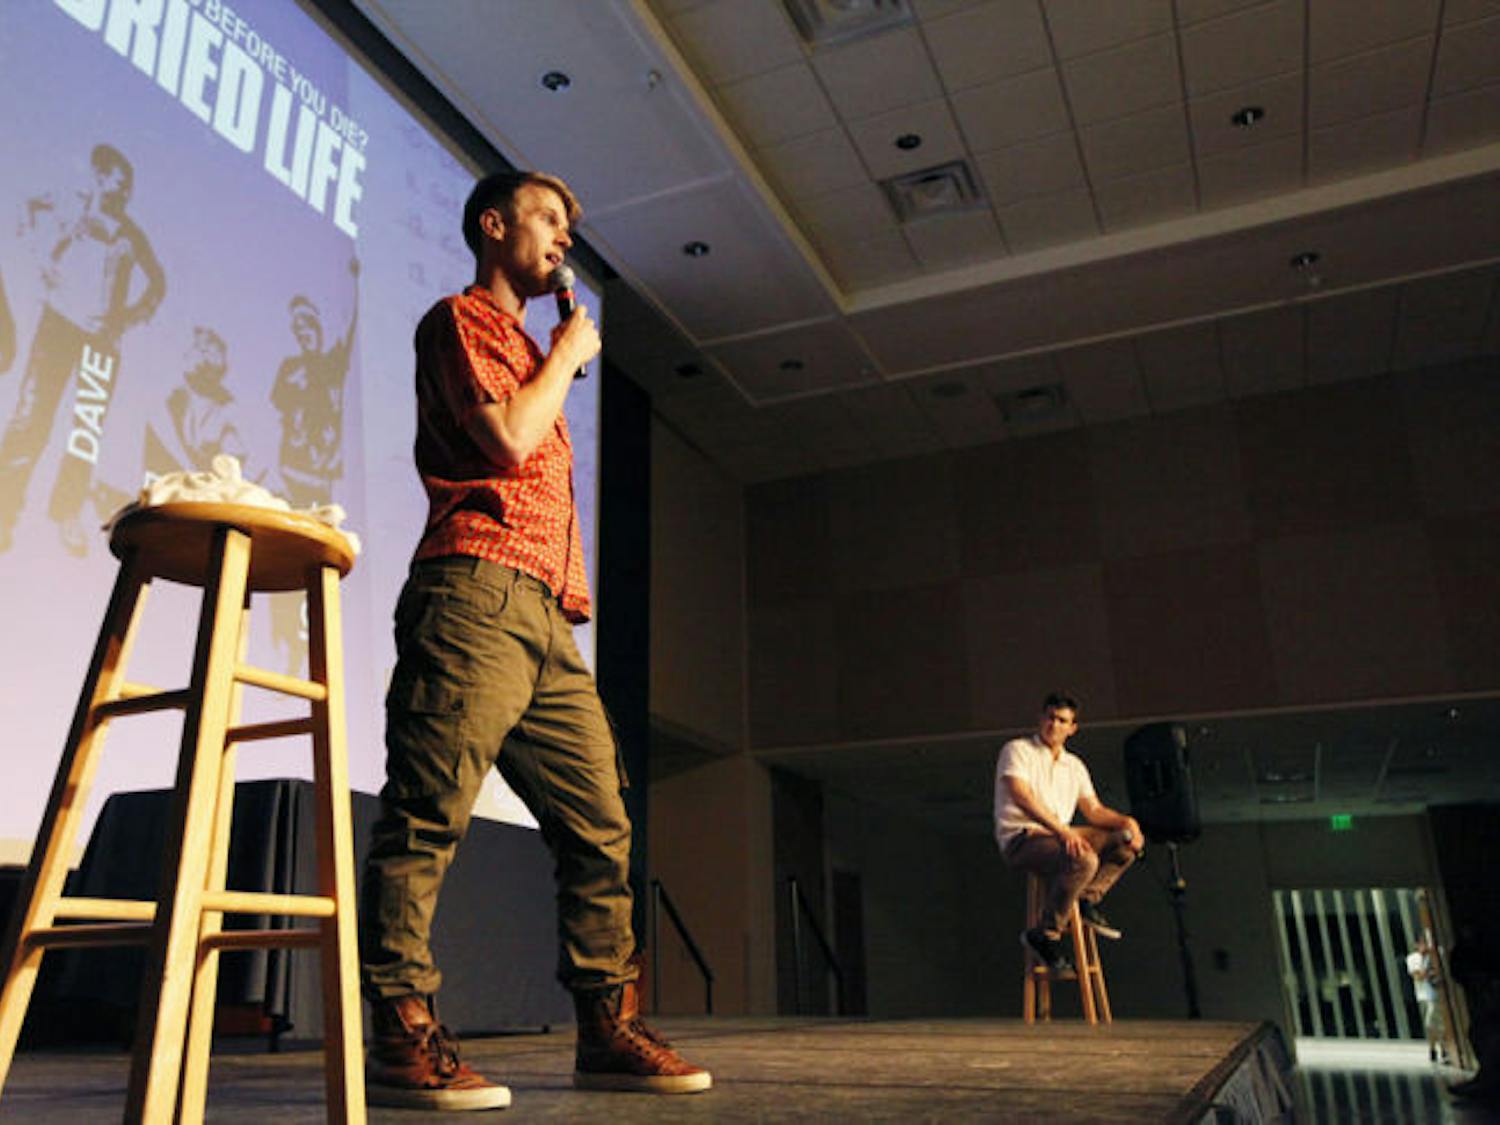 MTV’s “The Buried Life” stars Jonnie Penn and Dave Lingwood, presented by RUB Entertainment and Hello Perfect, speak to students at the Reitz Union Rion Ballroom on Wednesday night.